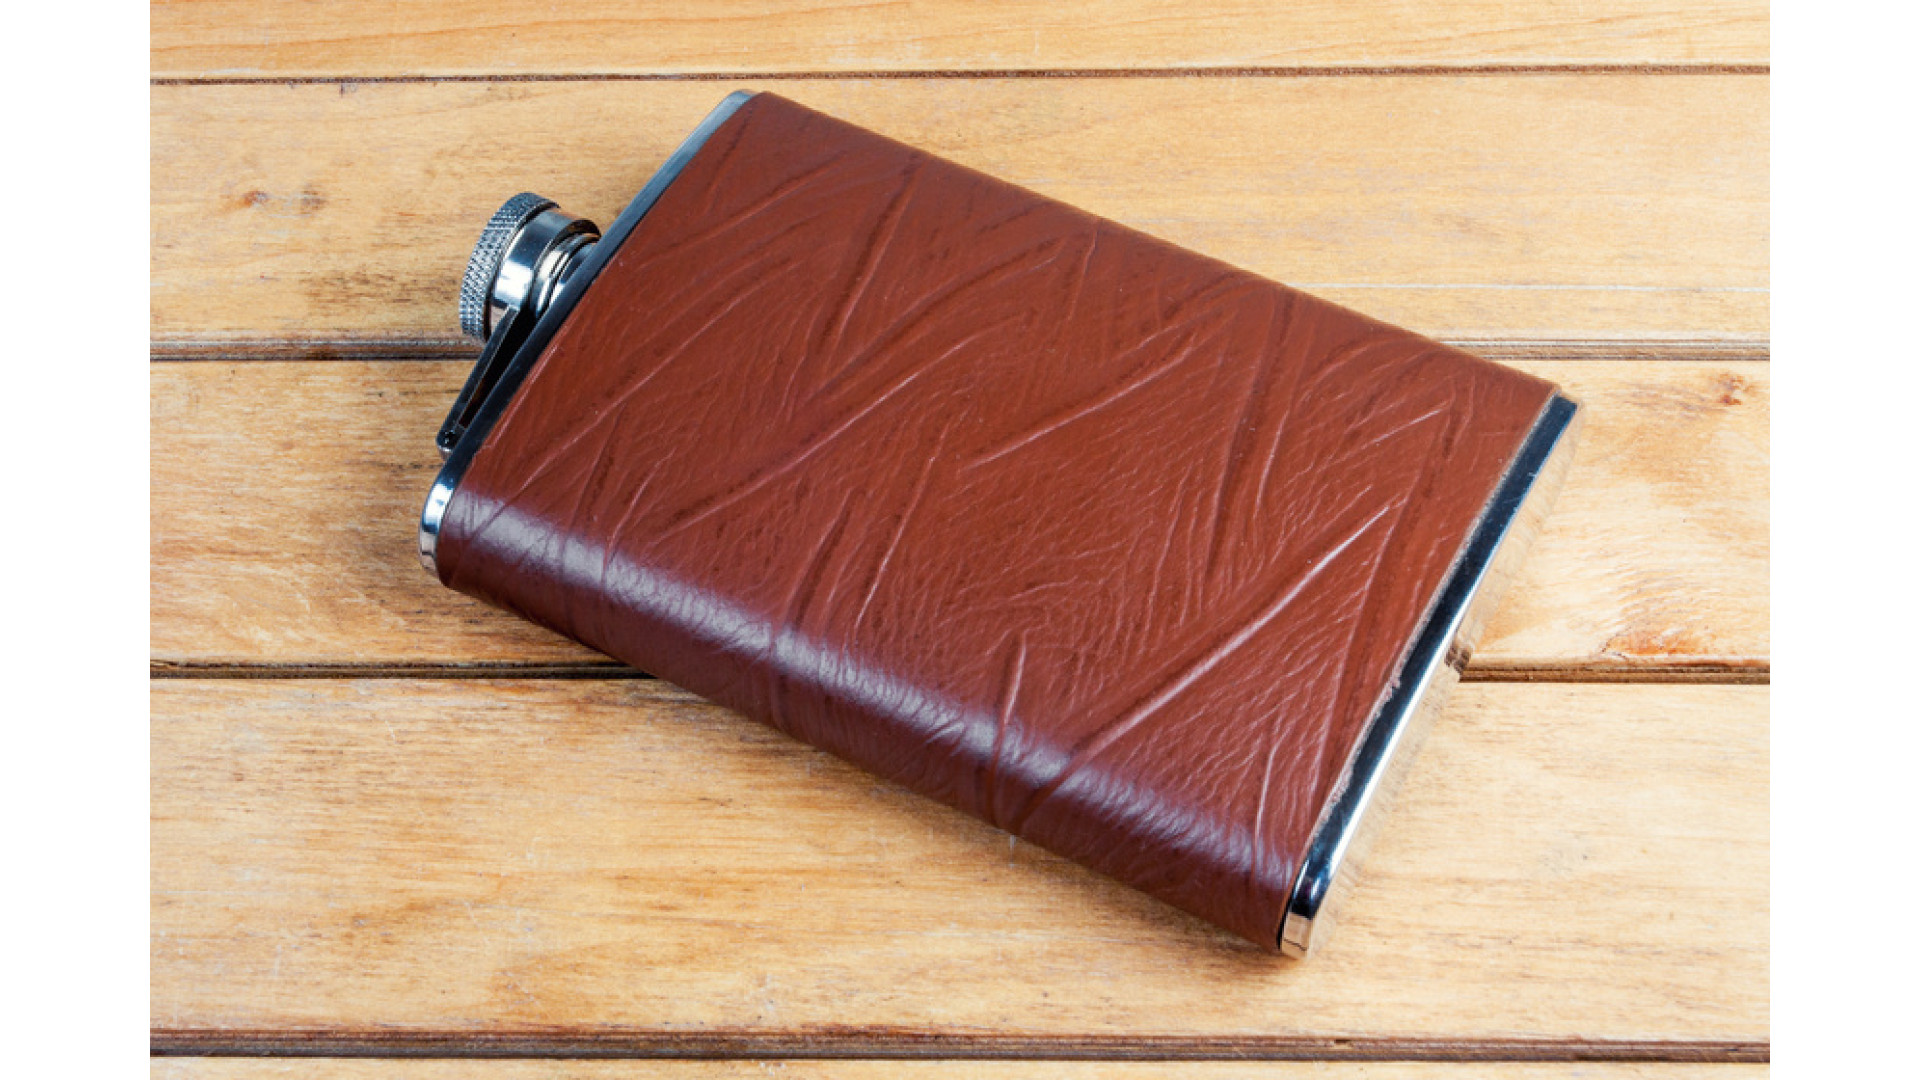 https://www.ckbproducts.com/image/cache/catalog/6-advantages-of-owning-a-leather-hip-flask-1920x1080.jpeg